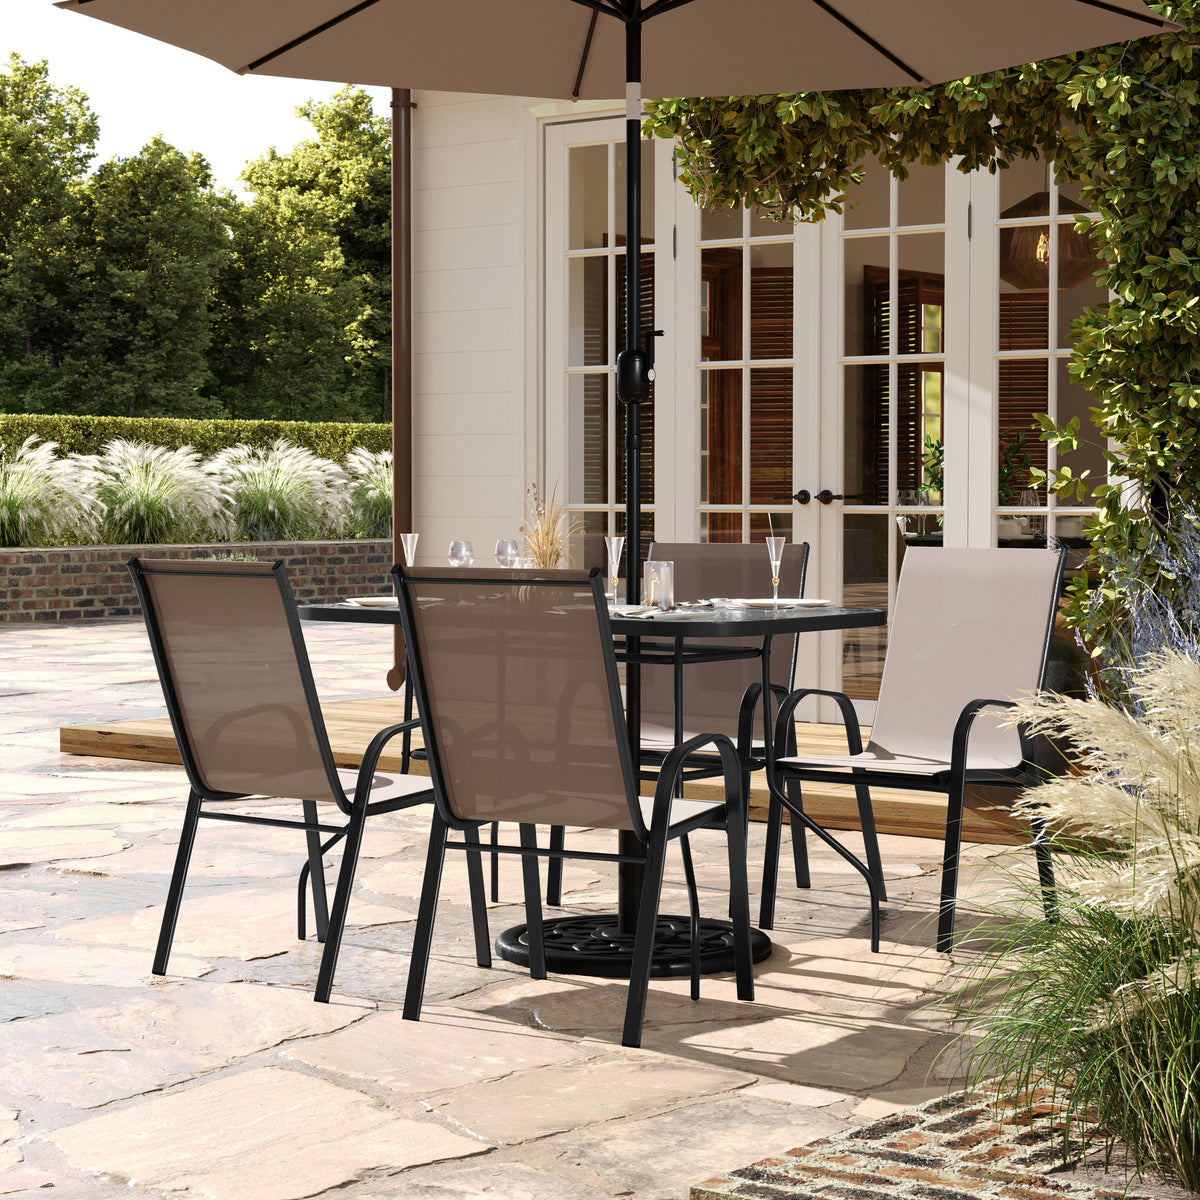 Brown |#| Commercial 5 Pc Outdoor Patio Dining Set with Glass Table and 4 Chairs - Brown